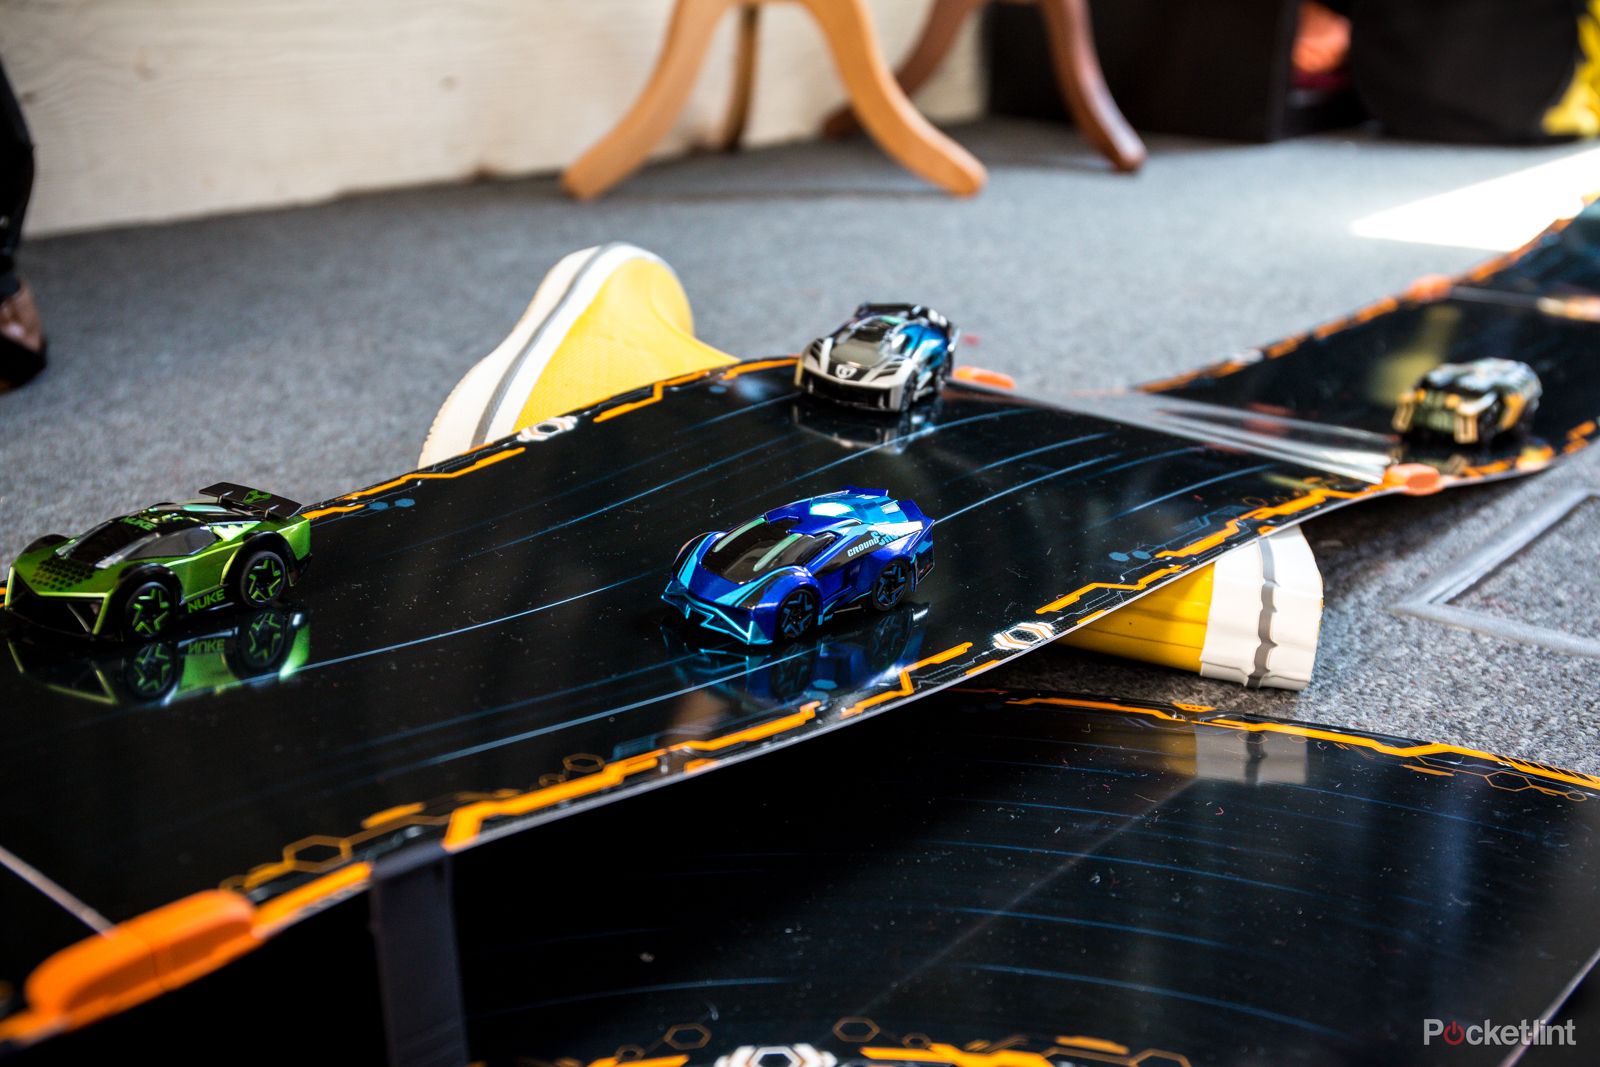 anki overdrive review image 1